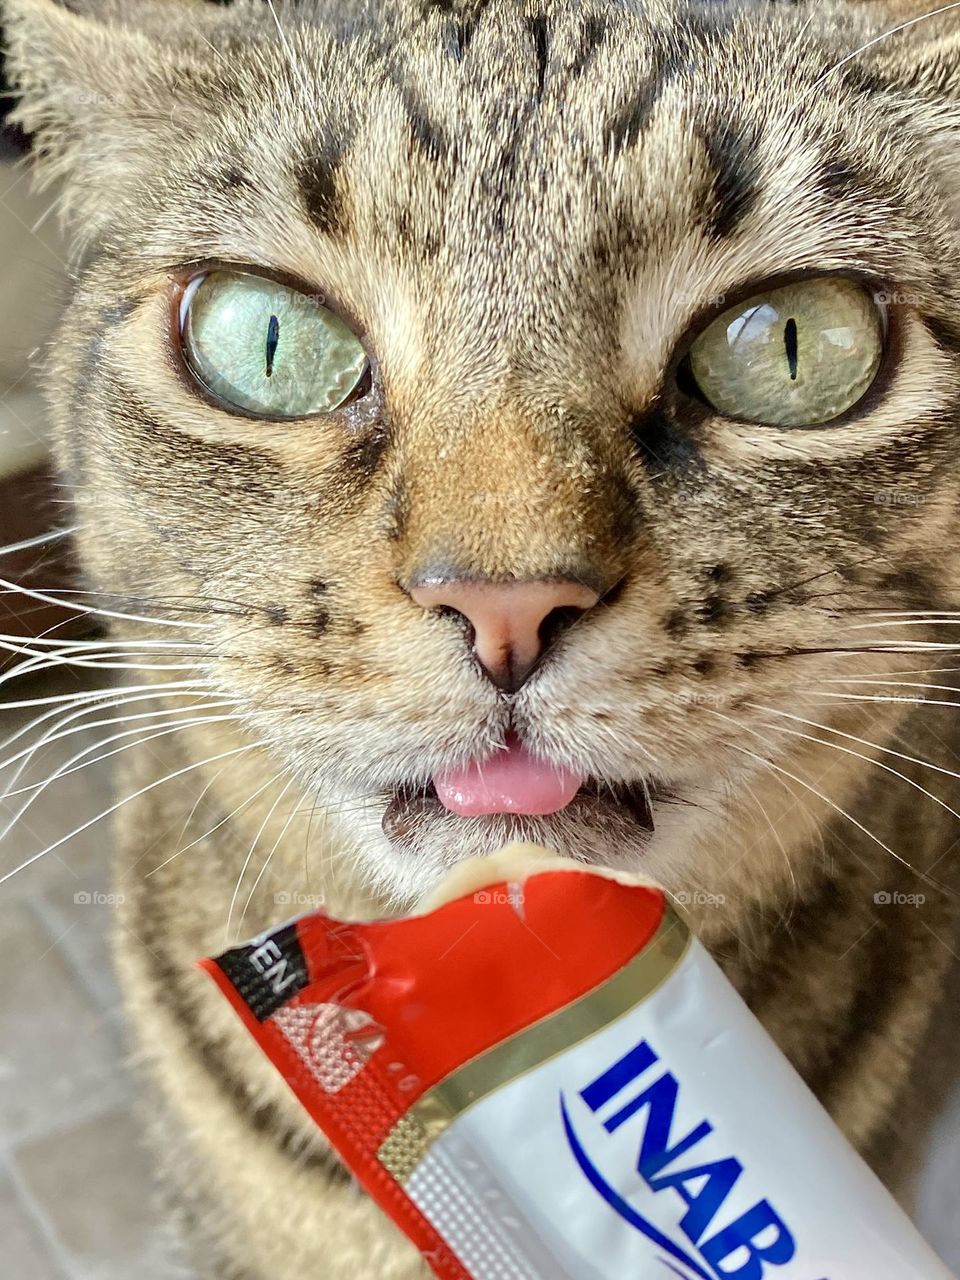 A cat eating a squeezy treat